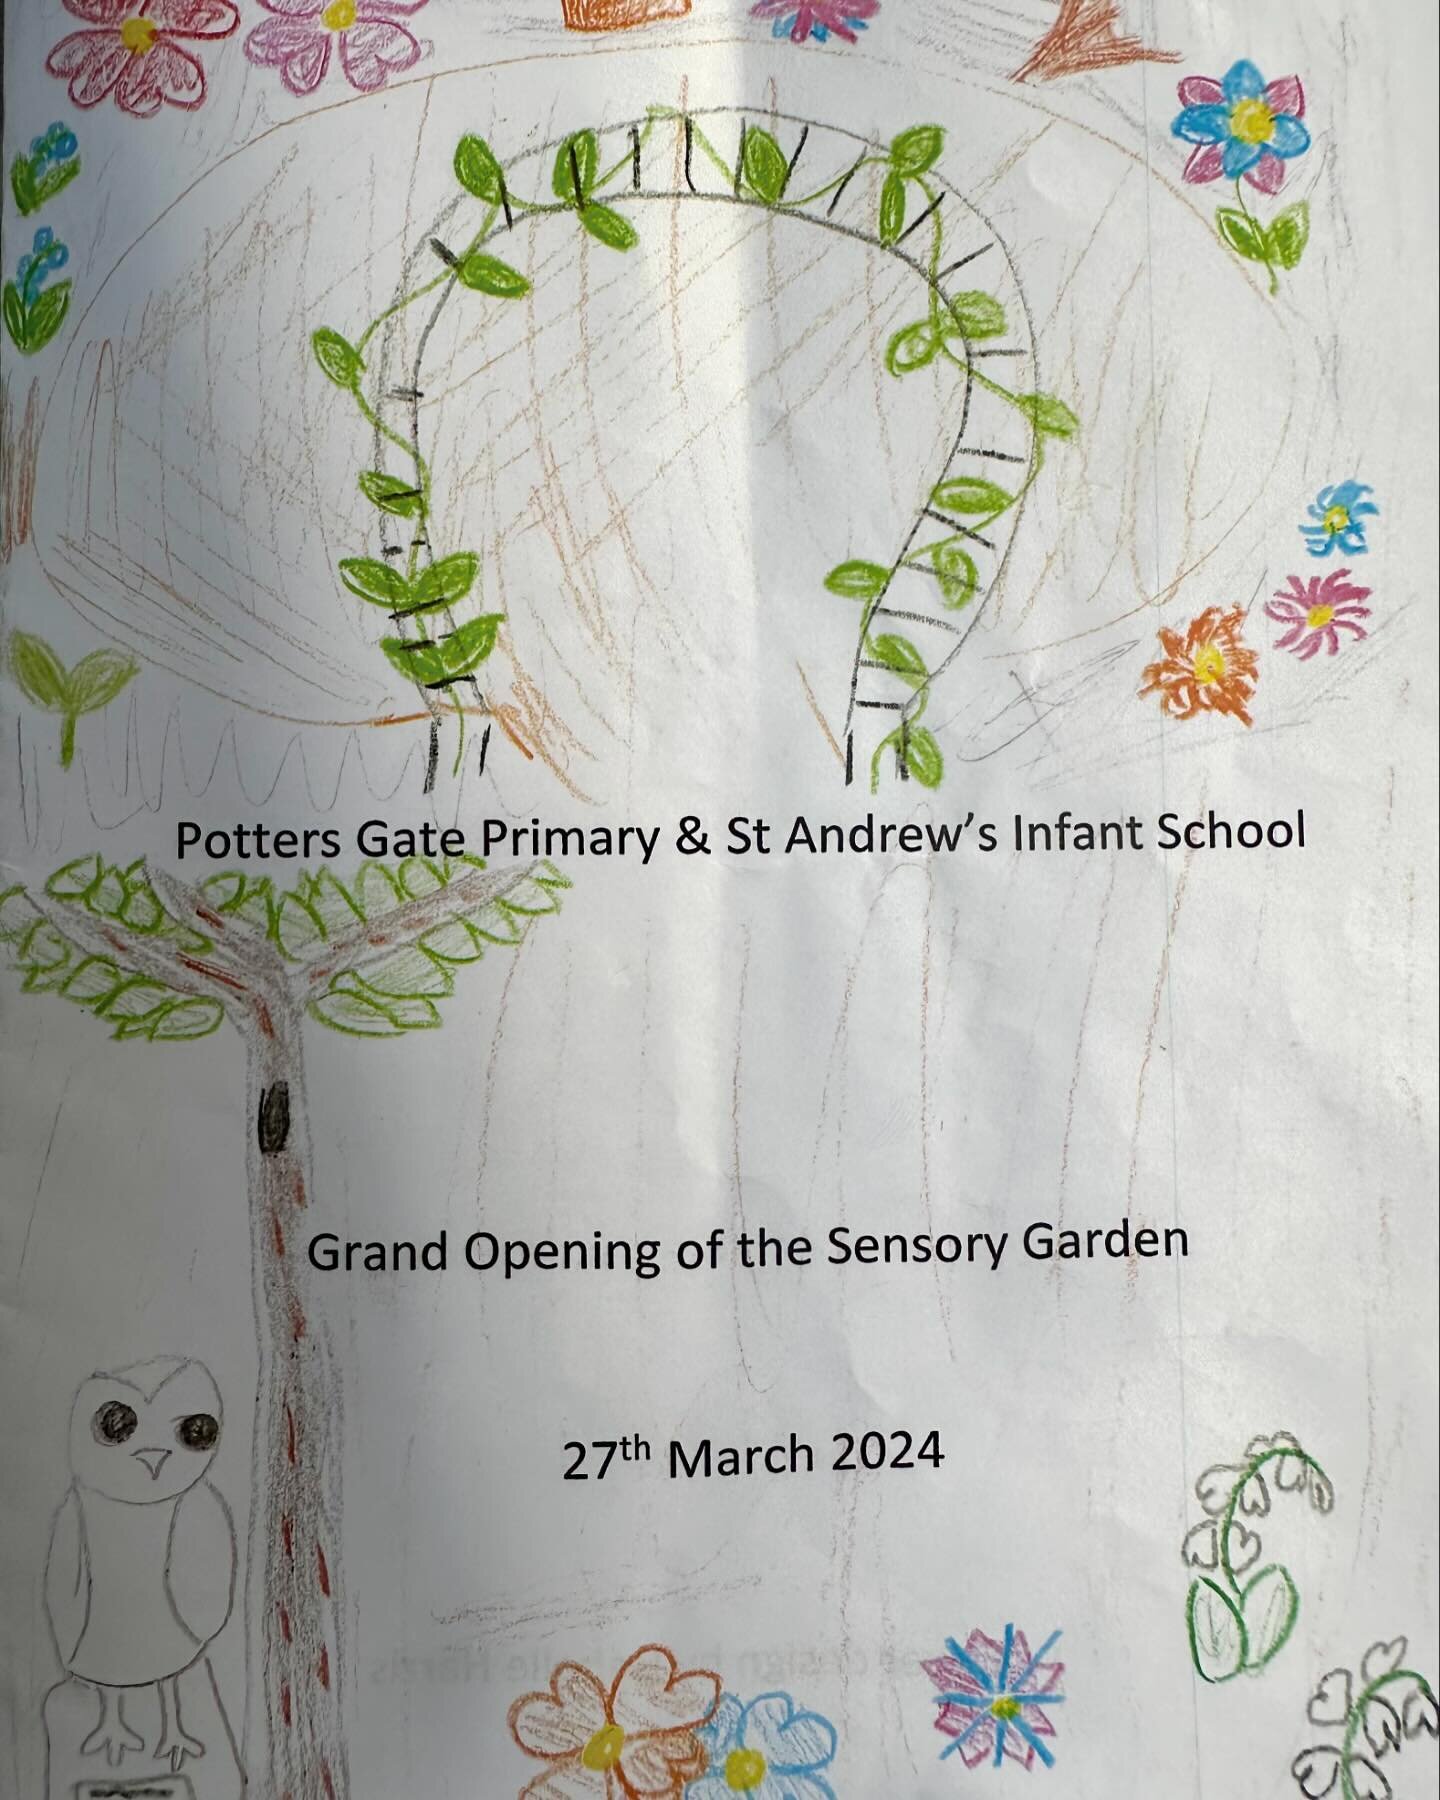 Lovely day - and the sun even shone - yesterday celebrating the opening of Potters Gate School sensory garden I designed with @victoriabaileygardens and built by @mettagarden
Fantastic musical performances by the children, looking forward to seeing t